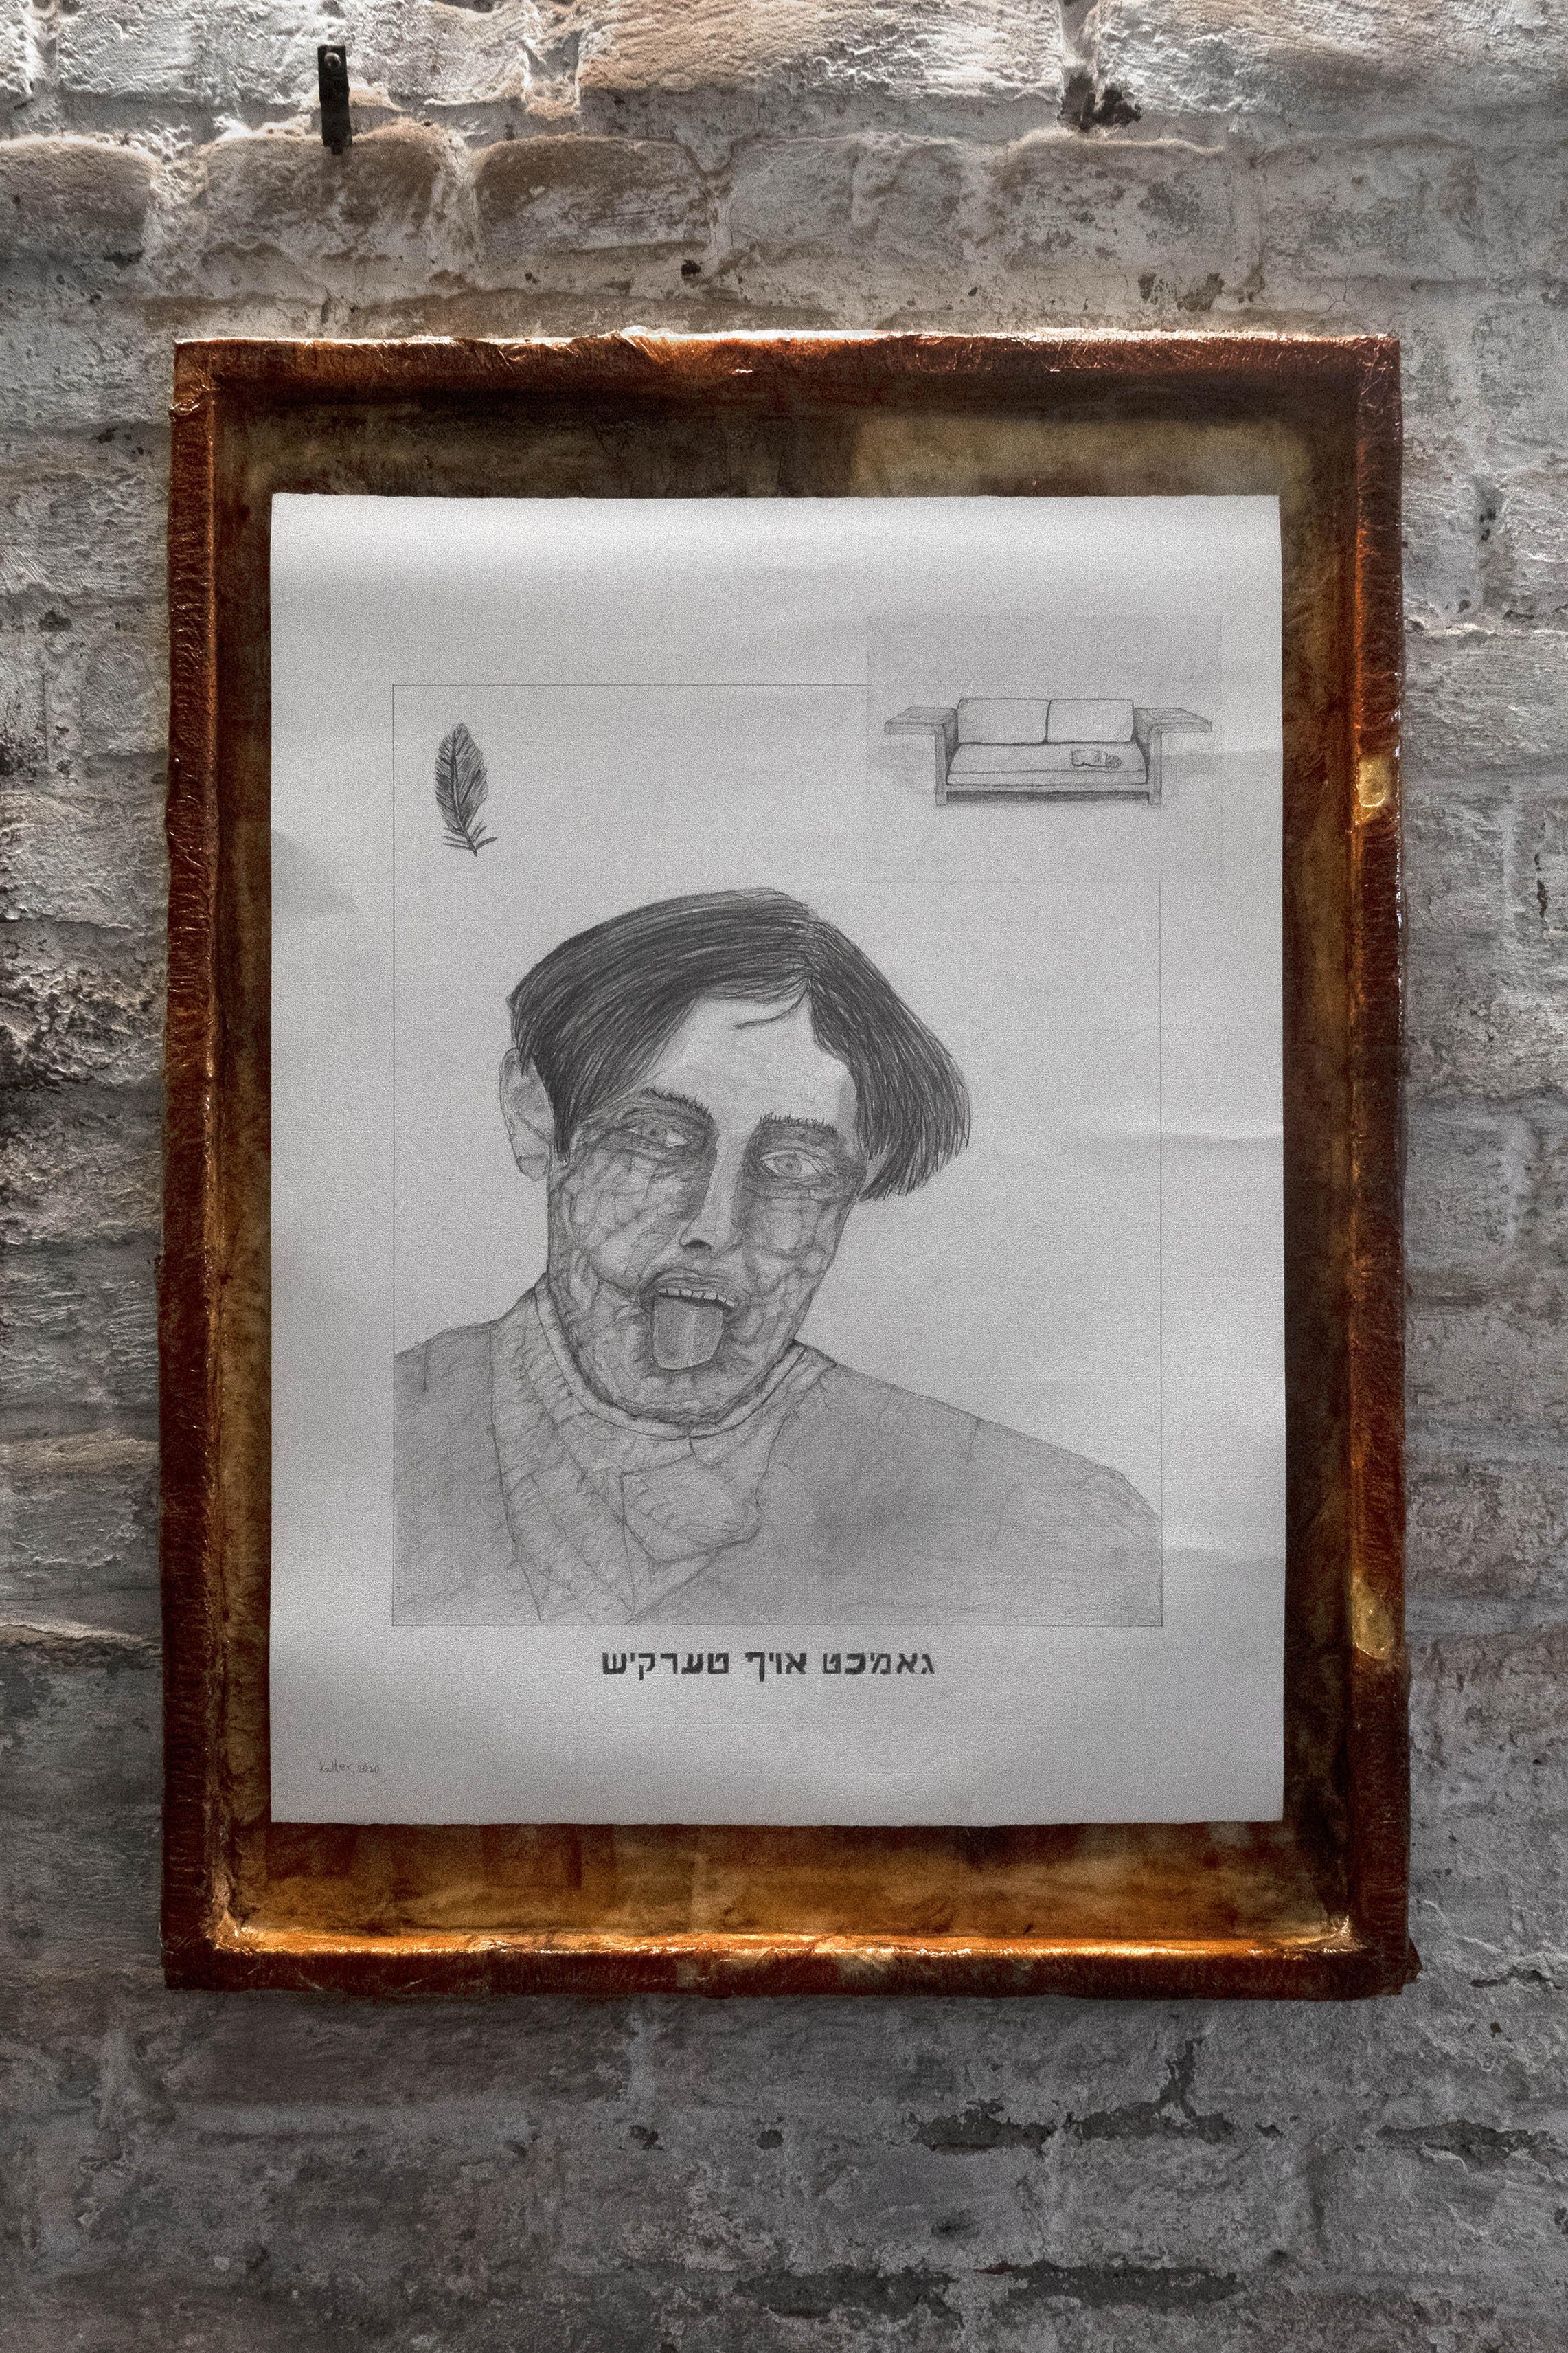 I. S. Kalter, "Made in Turkey", 2020â€“22. Pencil and graphite on paper, artist frame, 65x50 cm (with frame, 80x60x4 cm)